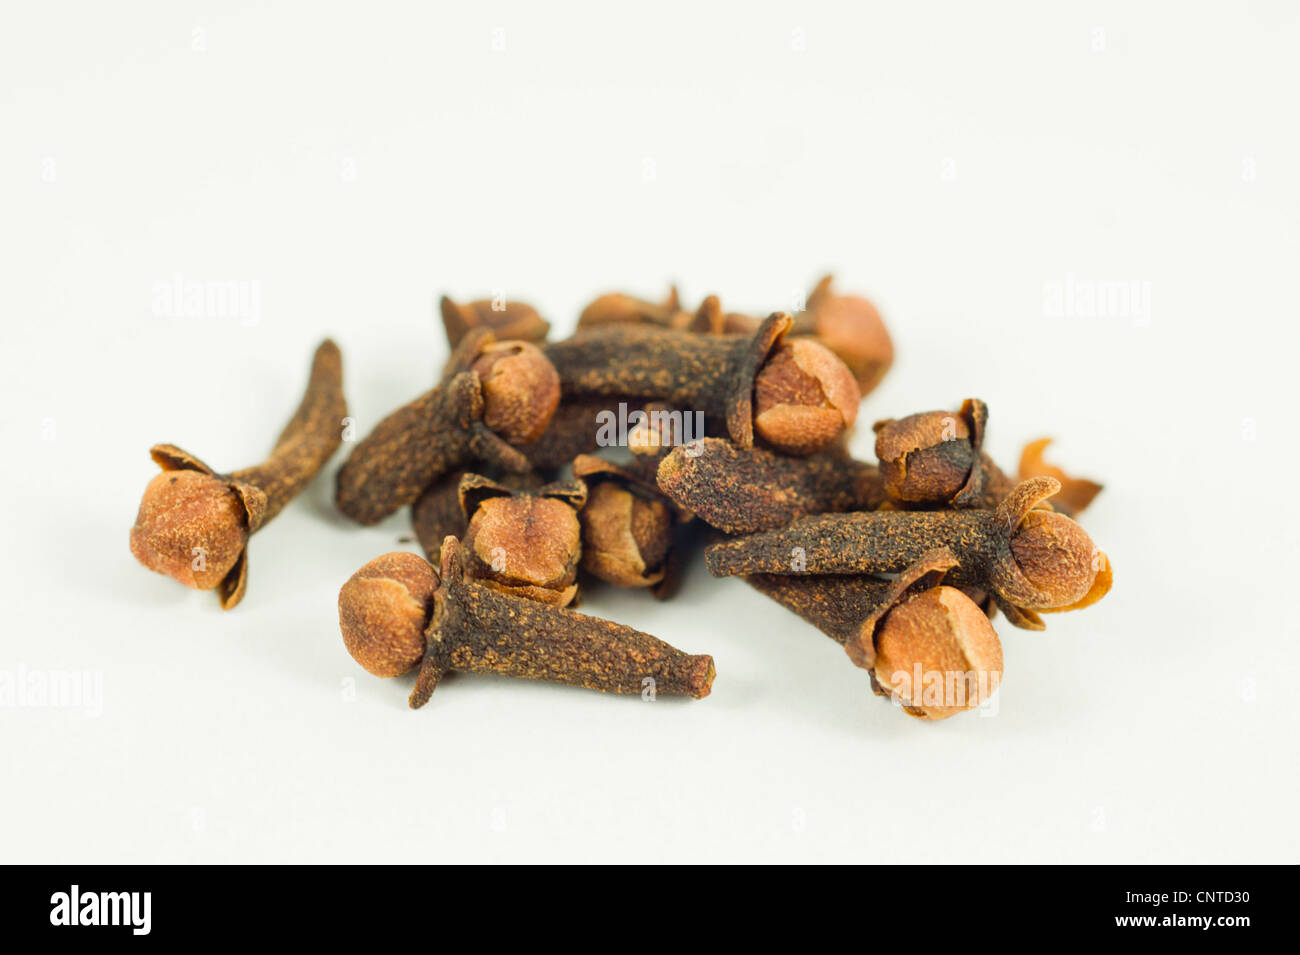 Cloves on a white background Stock Photo